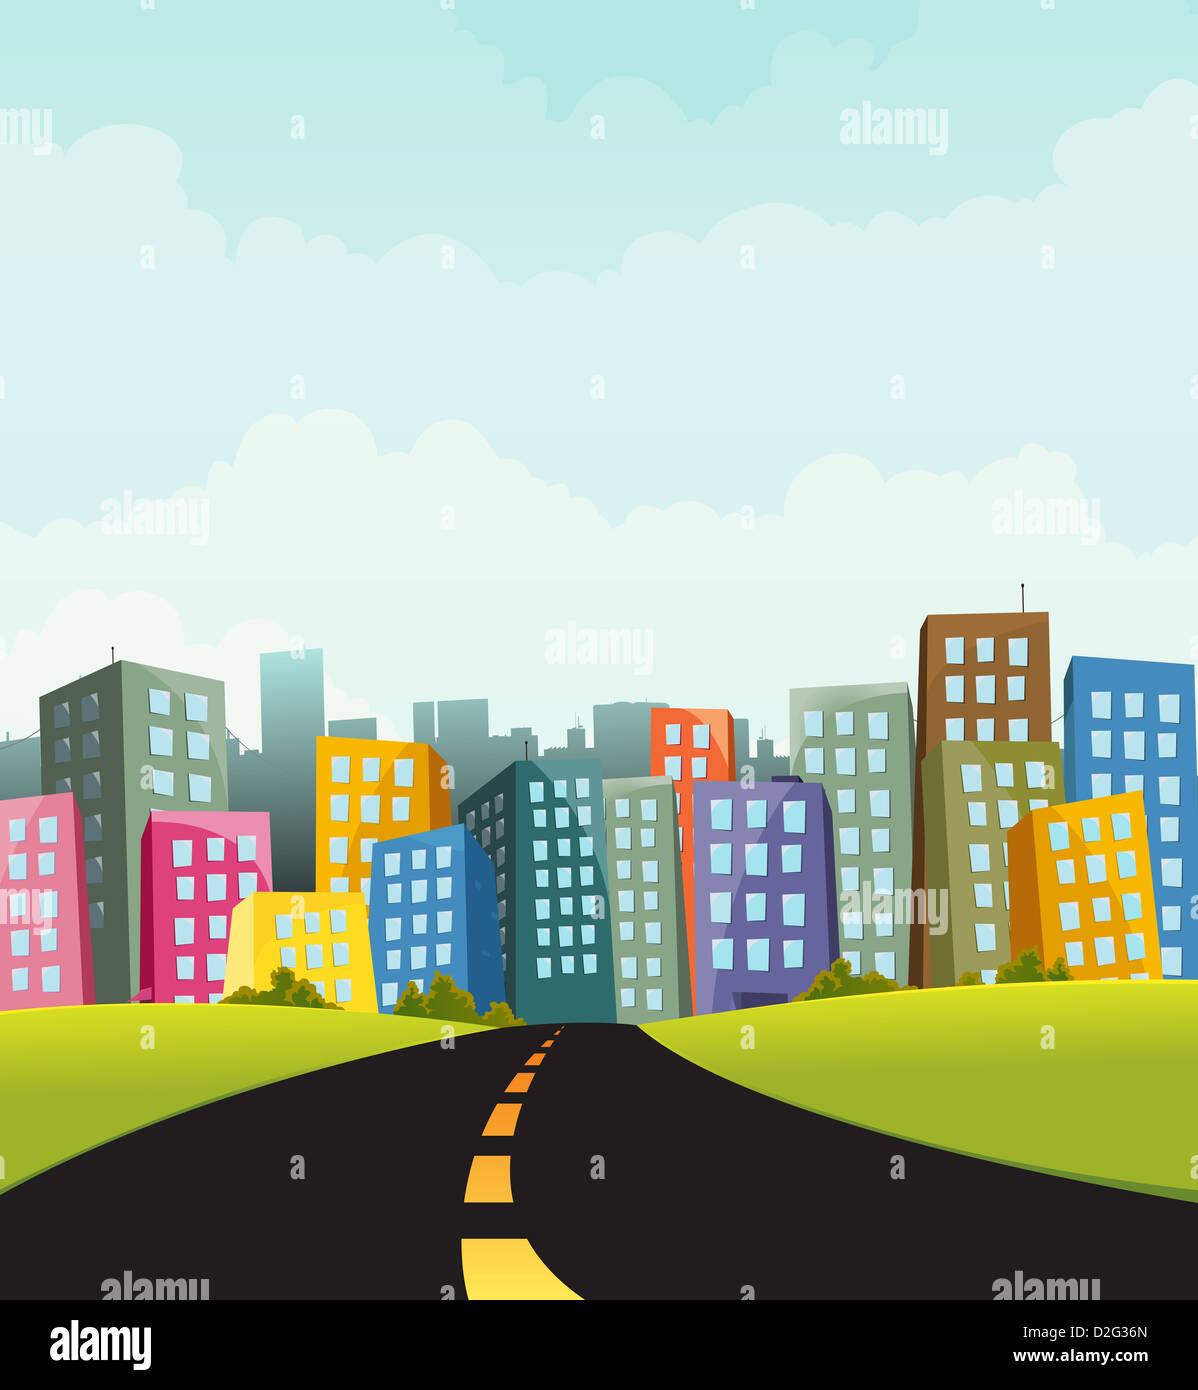 Illustration of a cartoon road going to town with fancy buildings Stock Photo